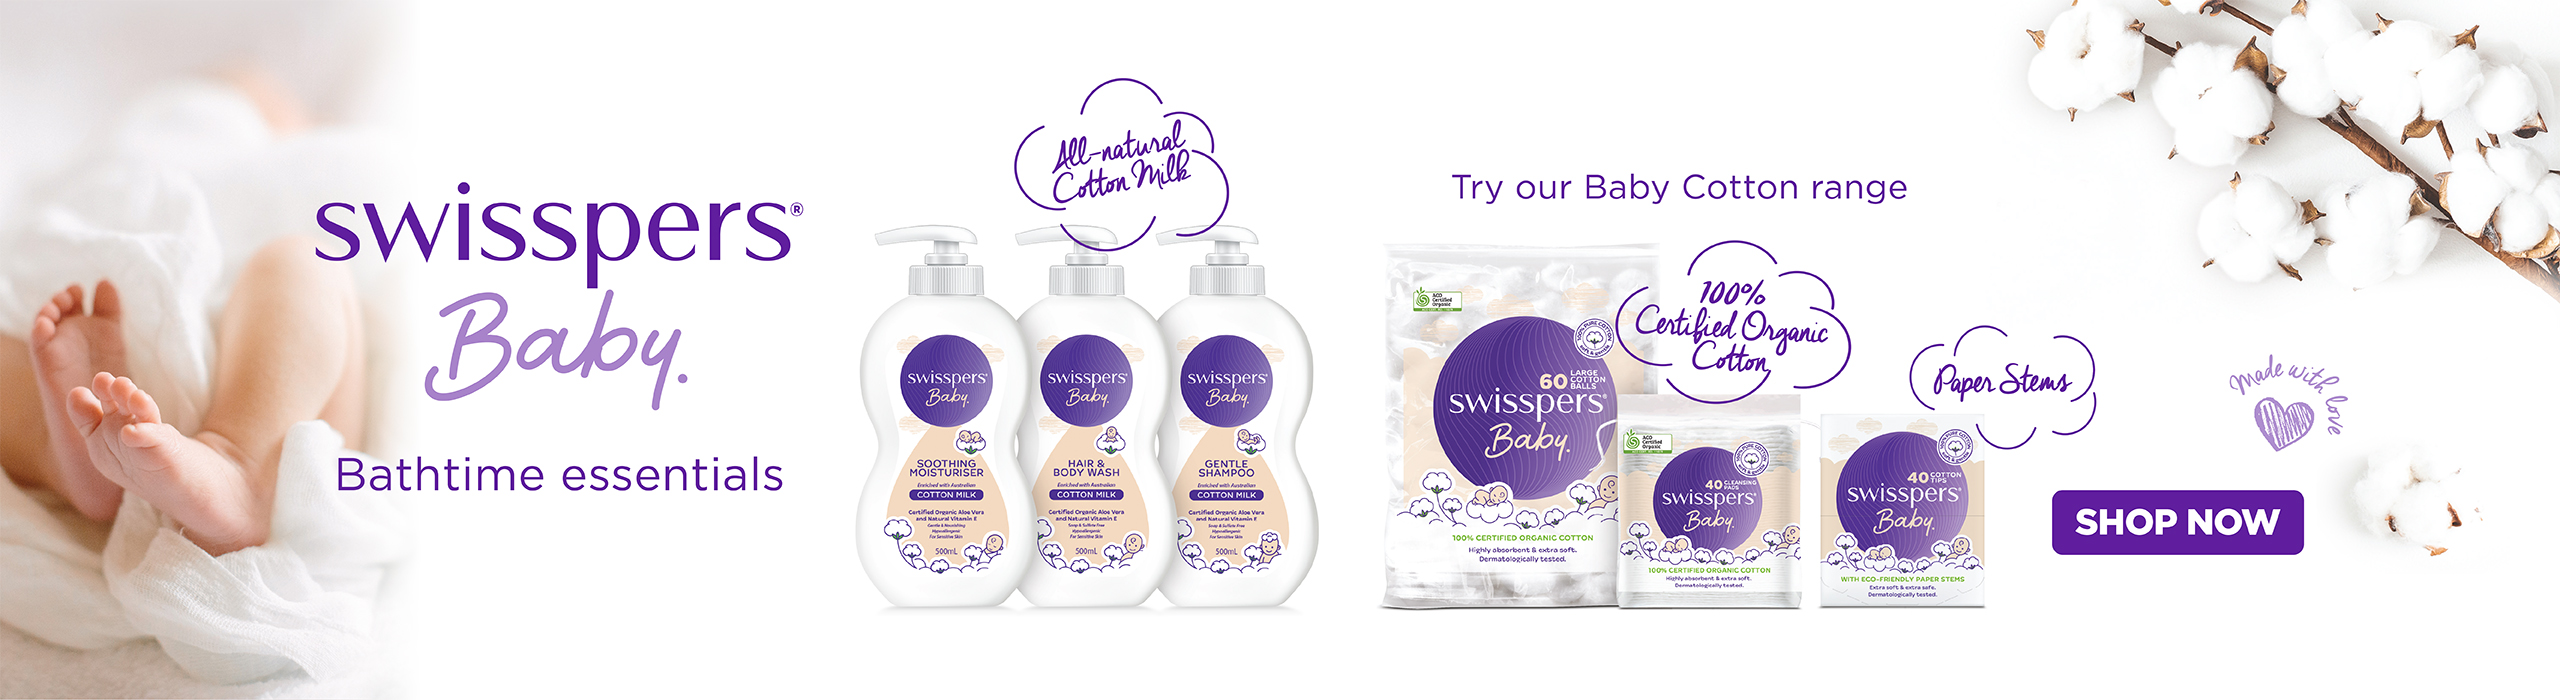 Swisspers Baby - With all-natural cotton milk for baby's delicate skin